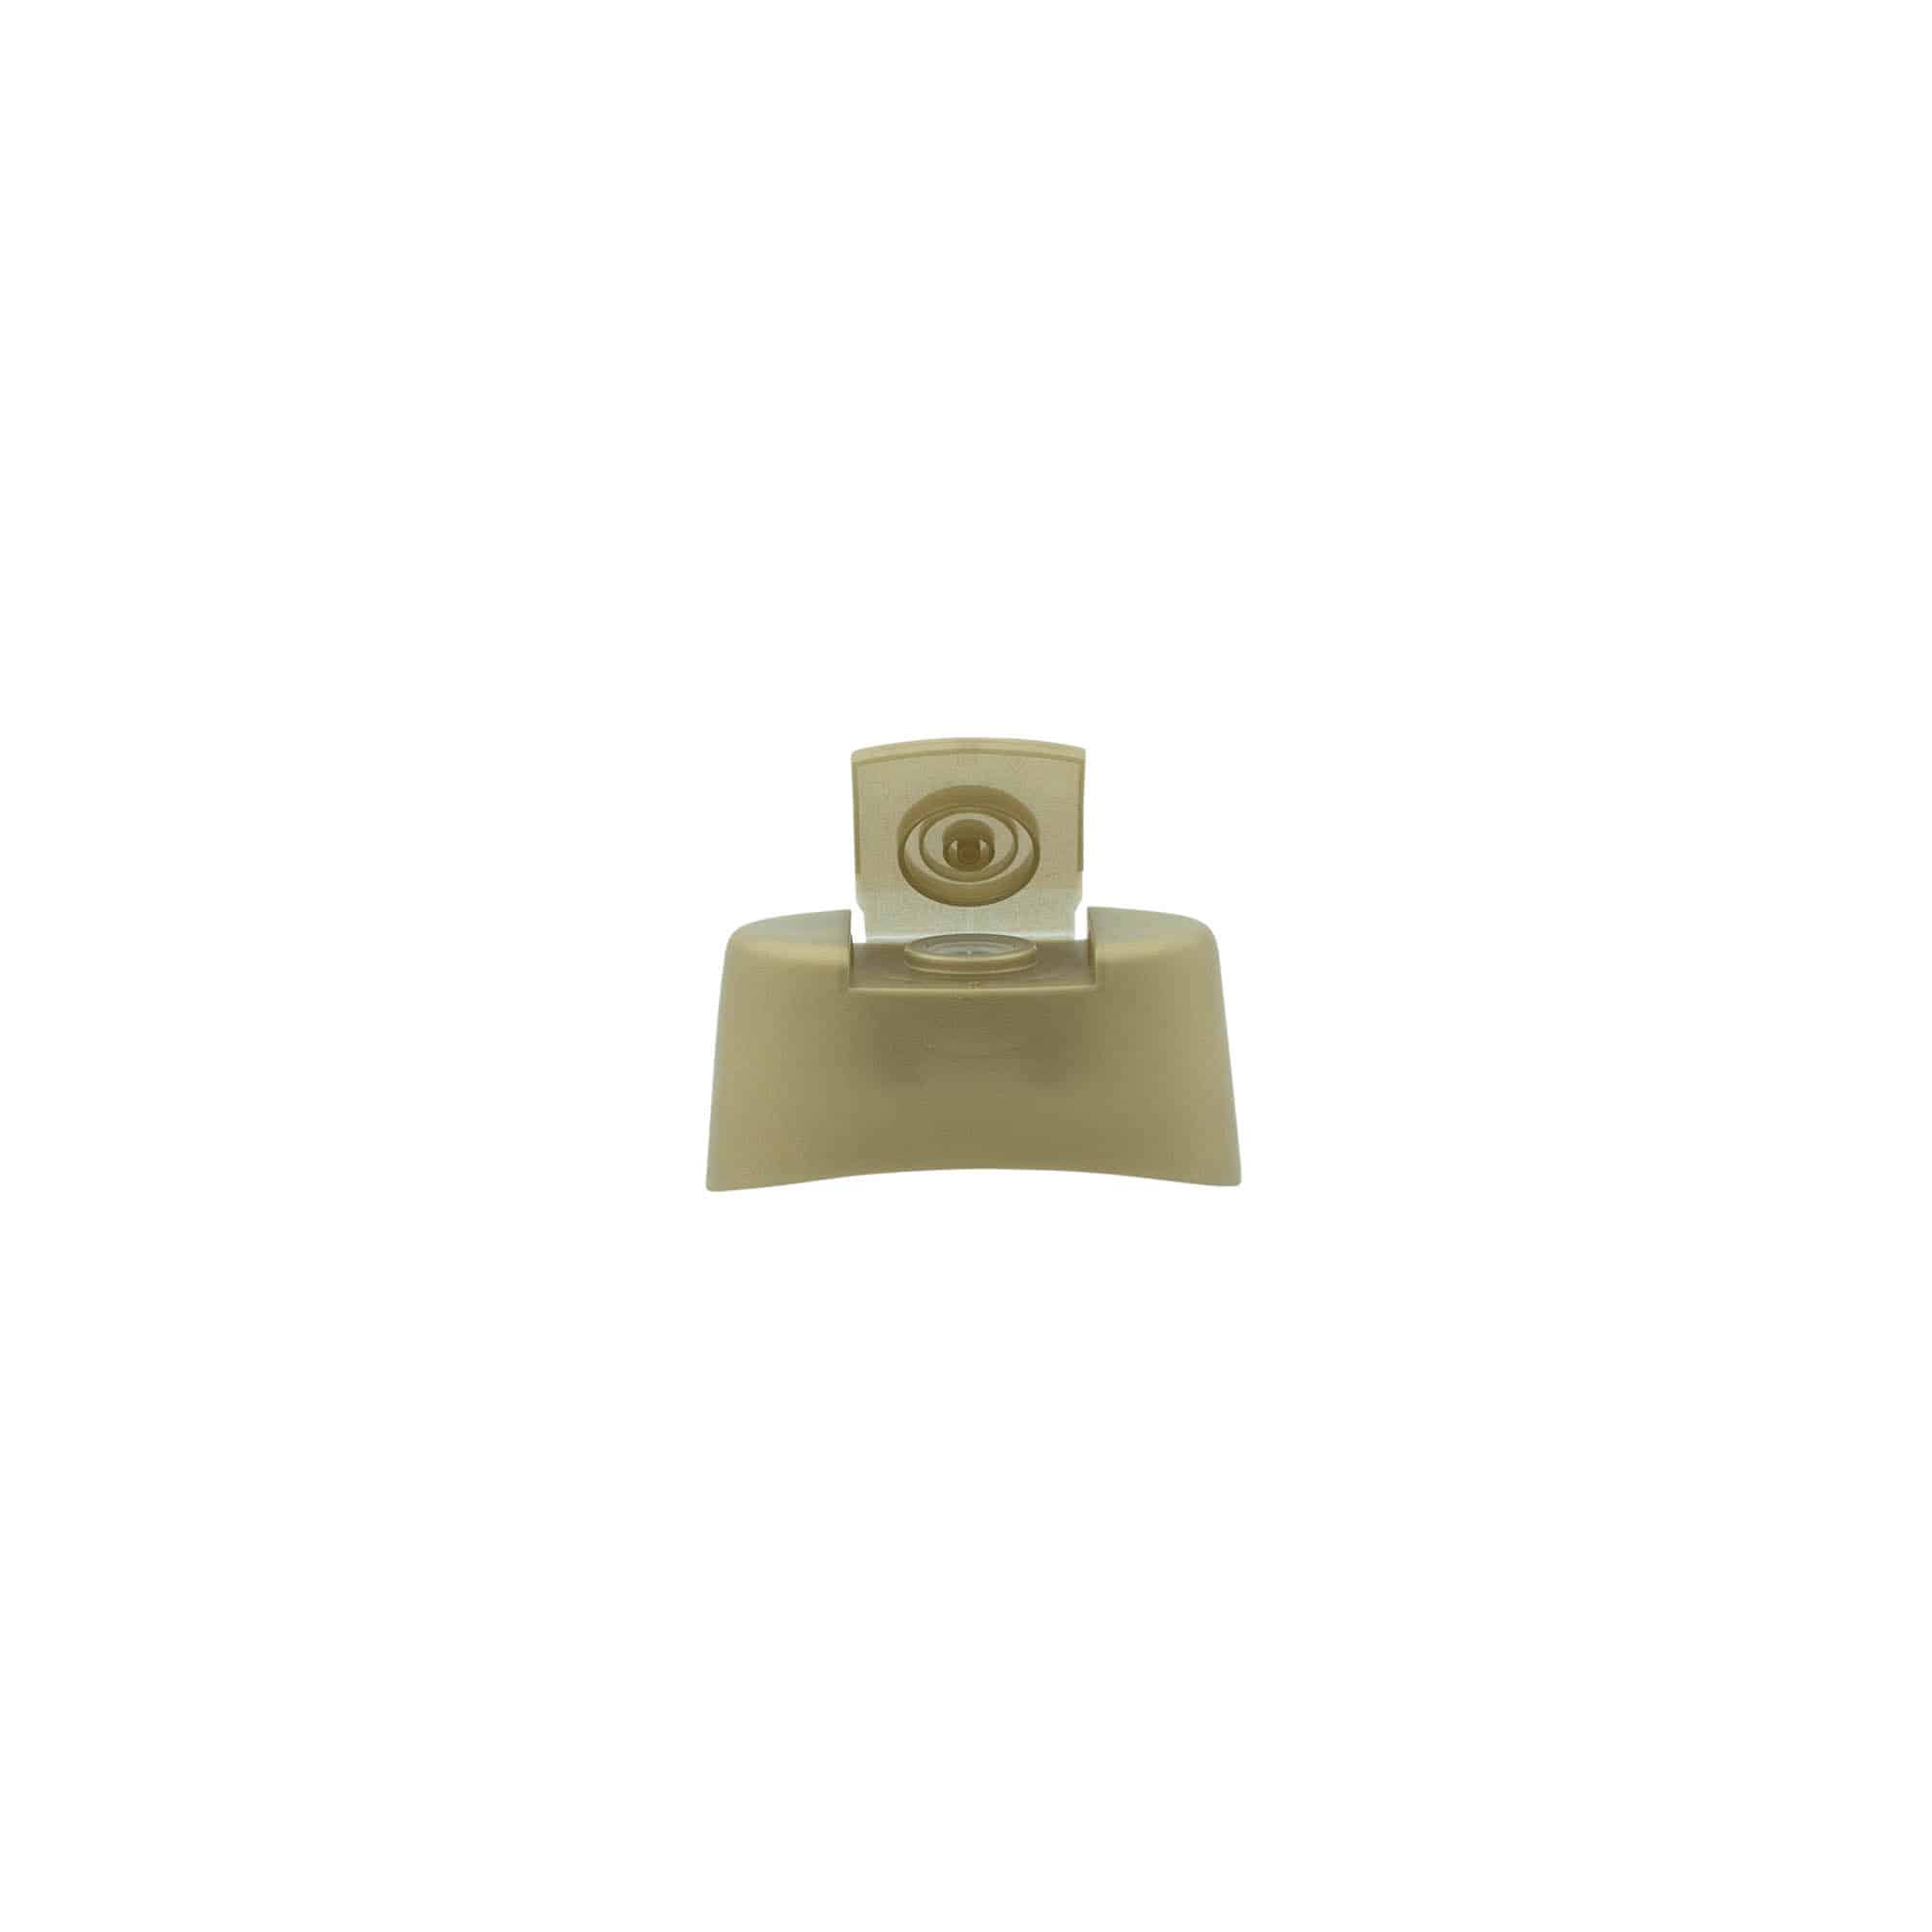 Hinged snap-on cap, gold, for: ‘Squeeze’ bottle